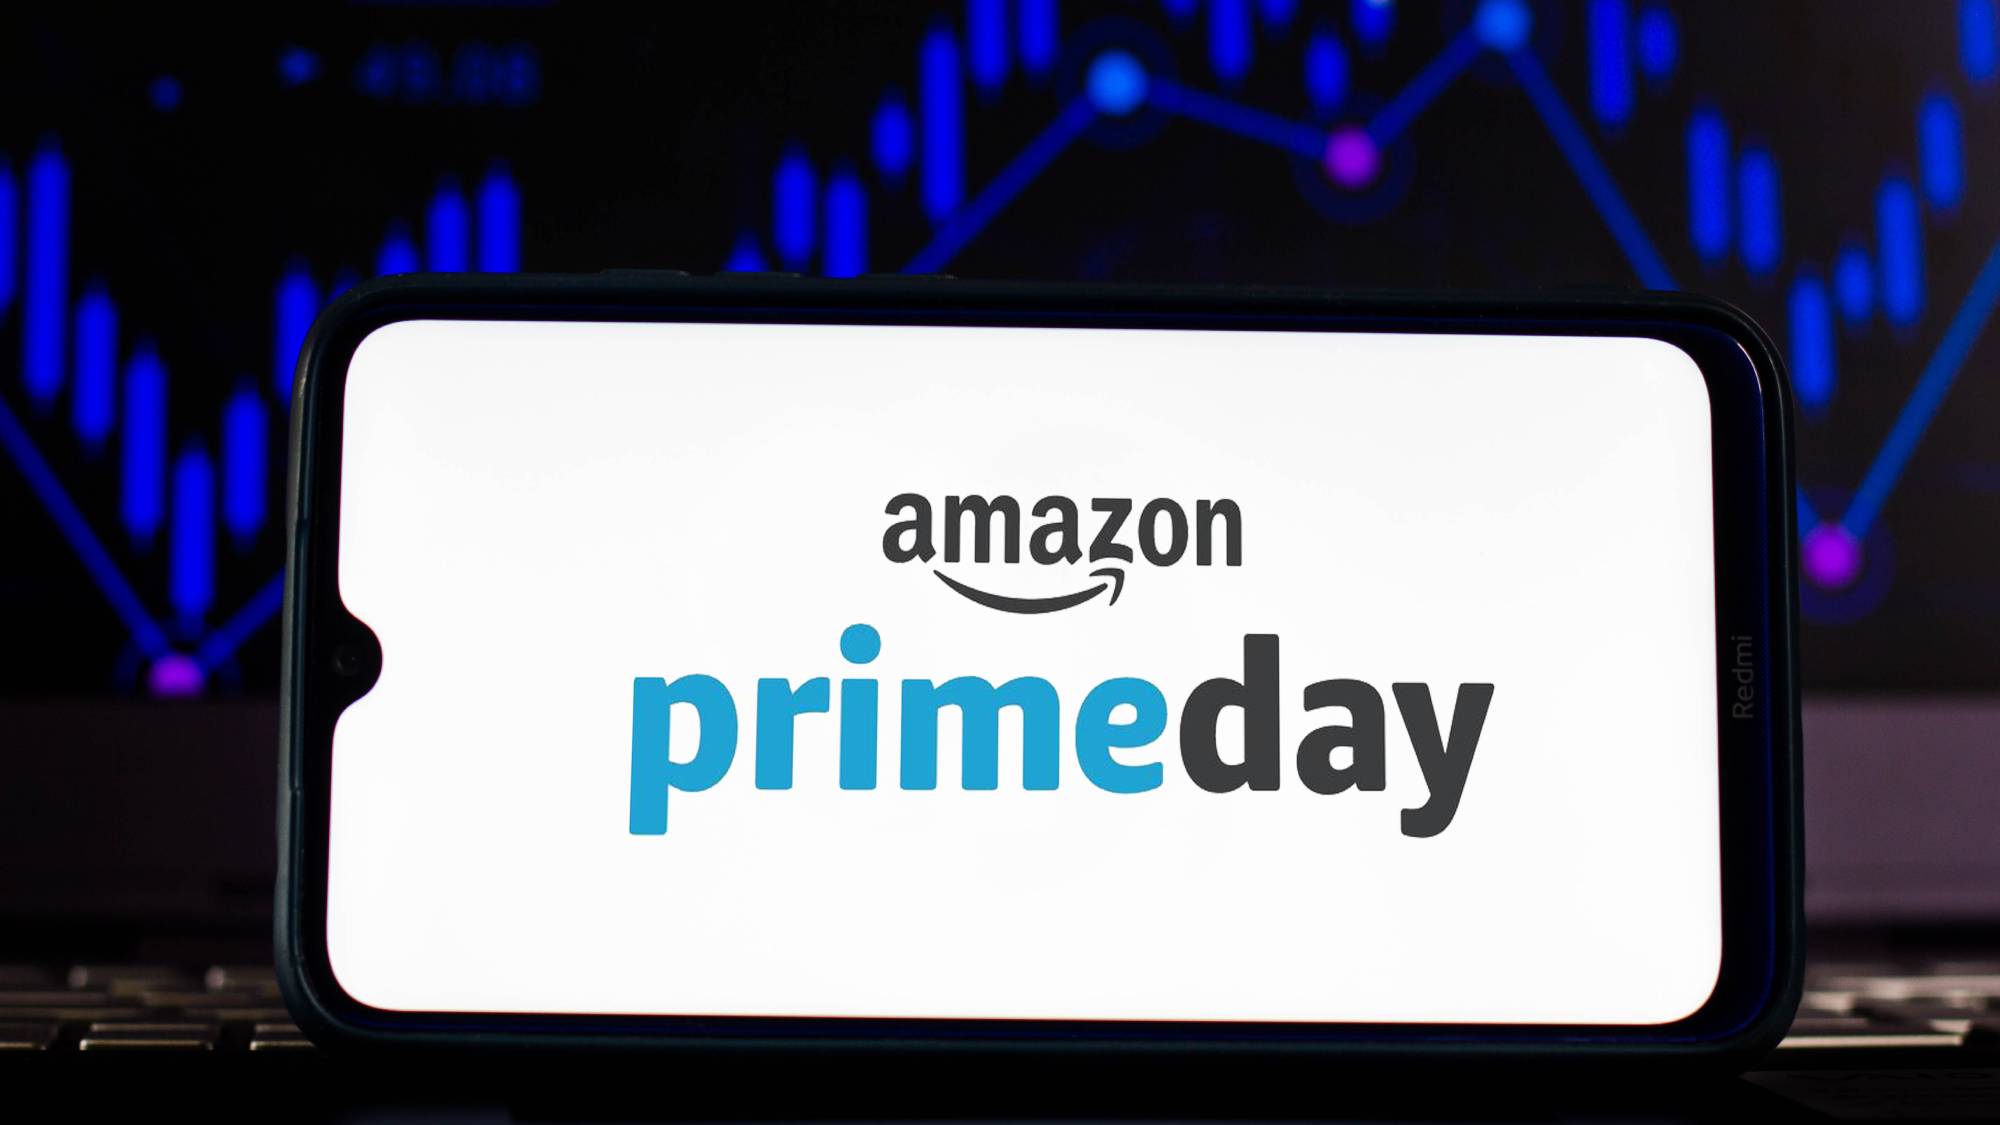 Amazon Top Day 2022 is officially set for July